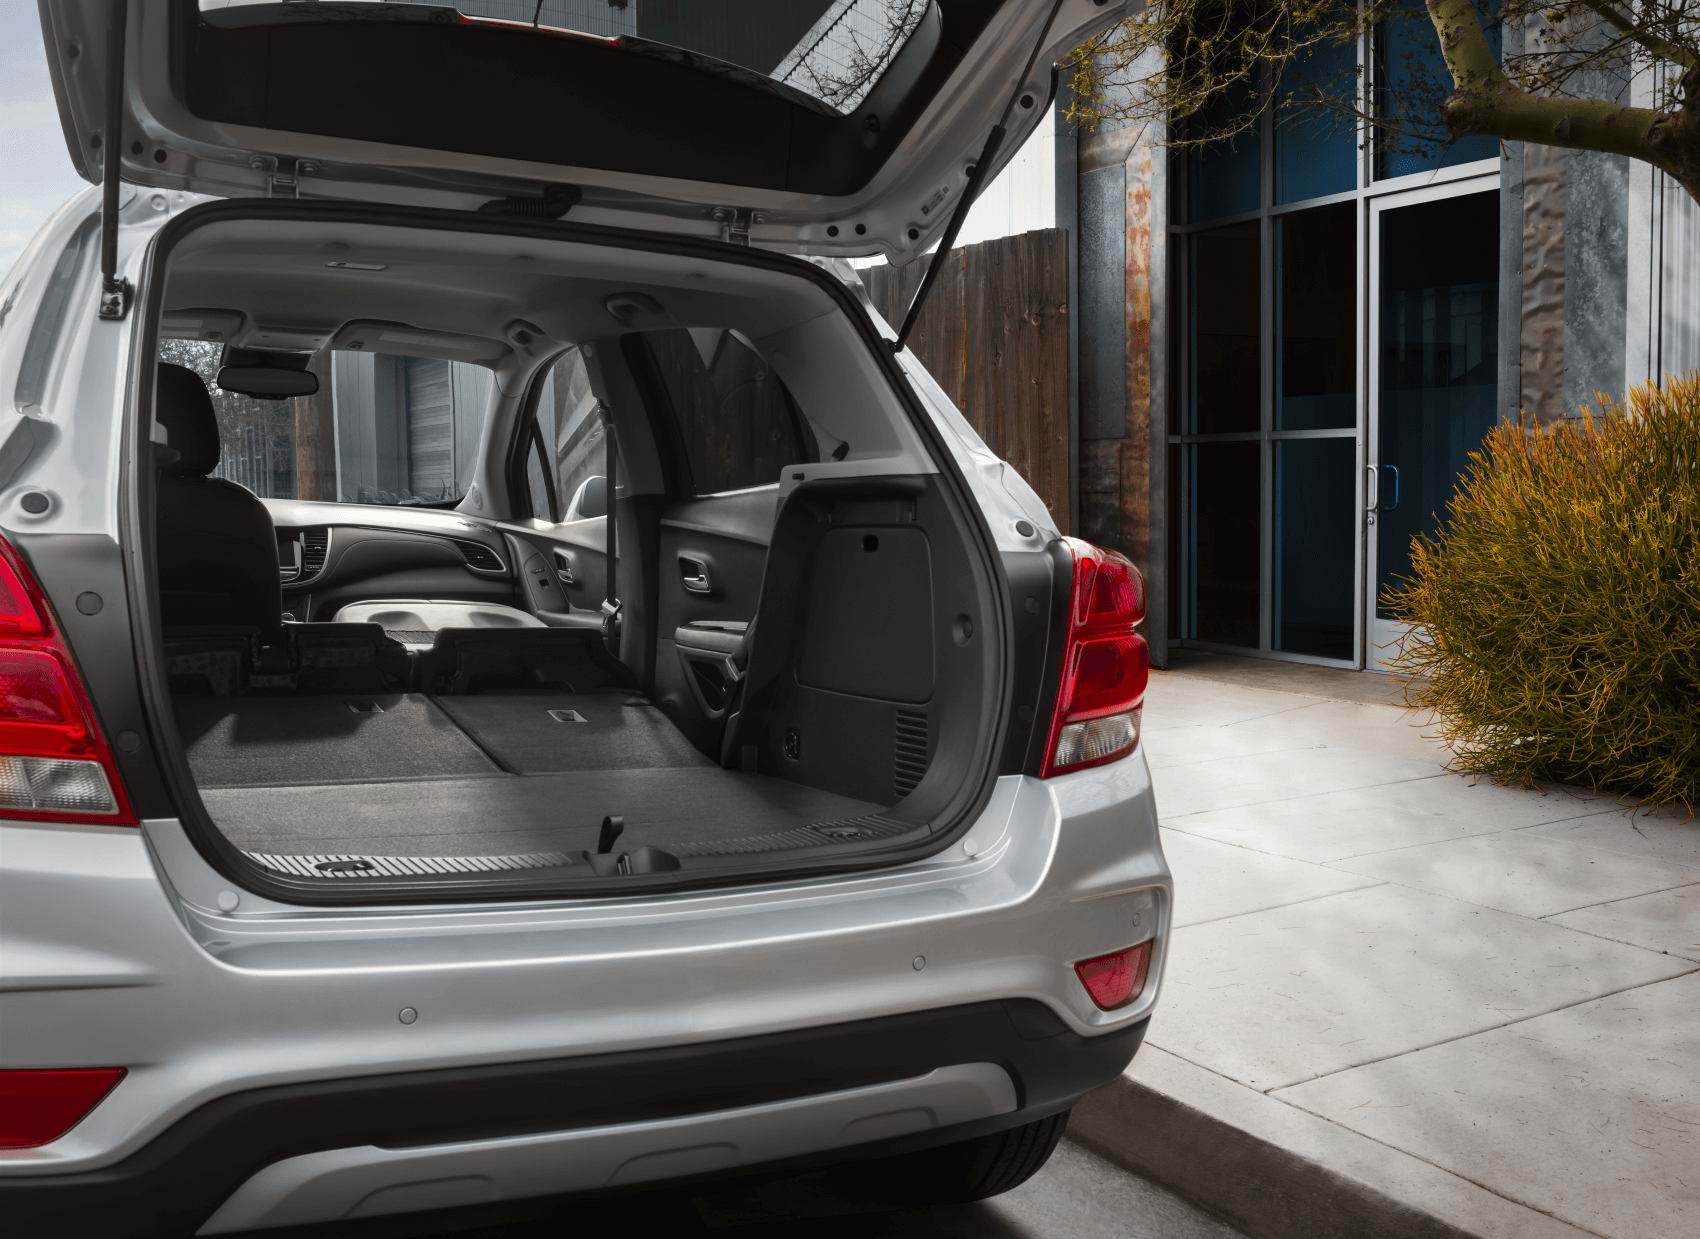 2021 Chevy Trax Cargo Space Interior Folded Seats